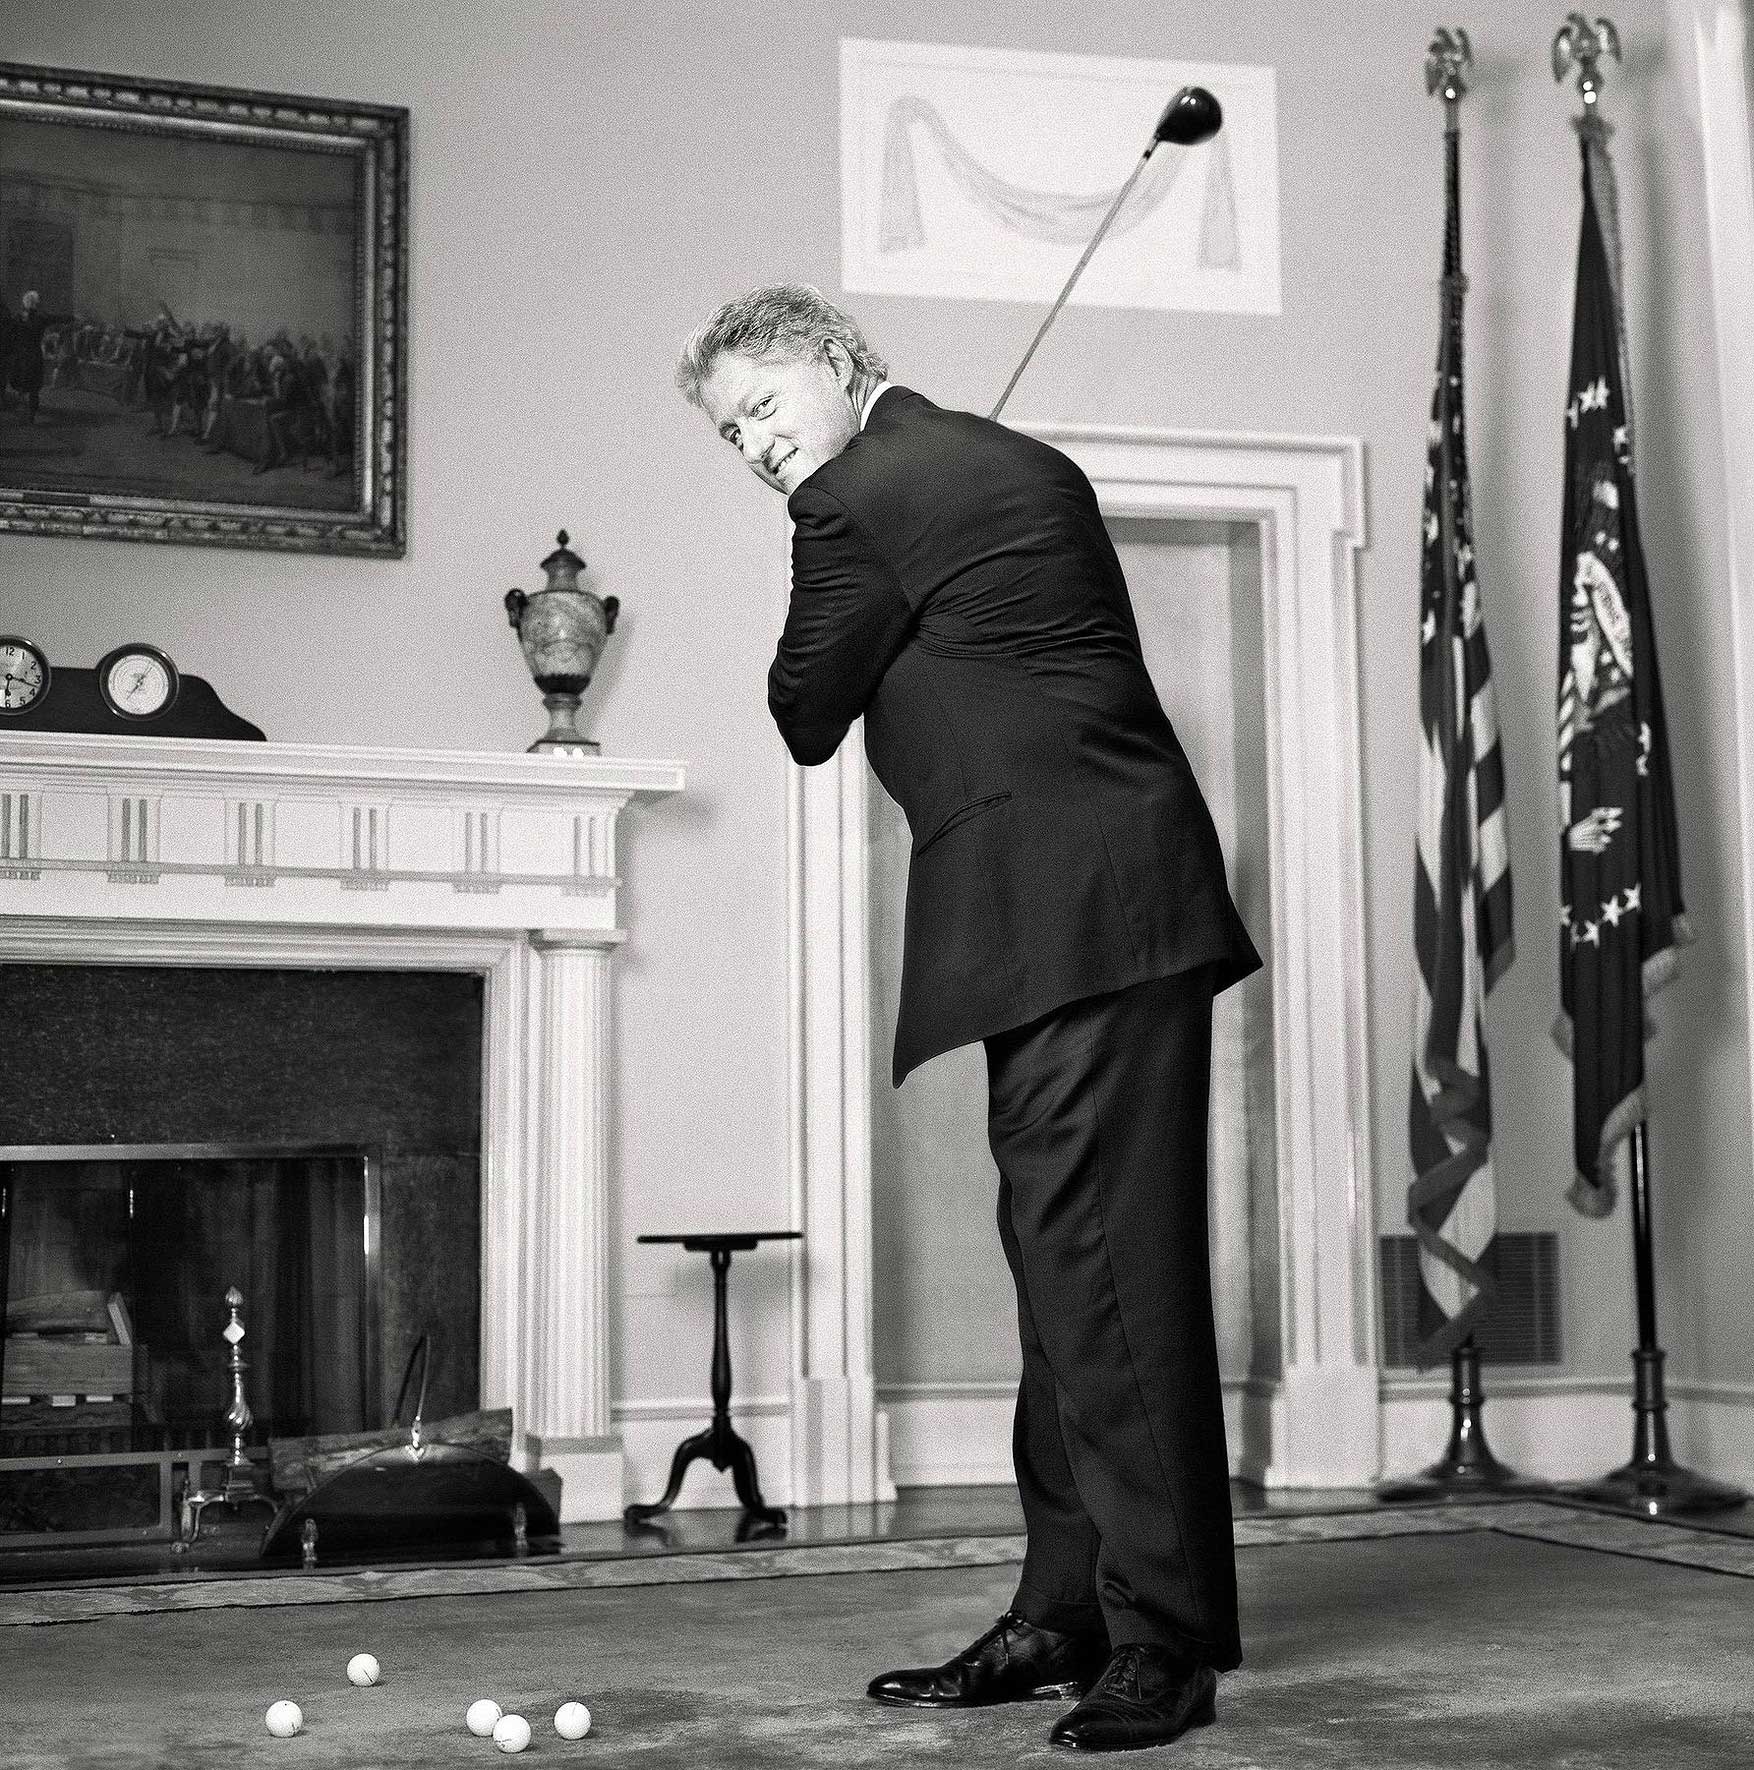 President Bill Clinton."It was definitely exciting, but also overwhelming and terrifying. I read up that he is a big golf fanatic. Researching pictures of Presidents, I came across all the ones of Kennedy in the Oval Office with his kids, and these beautiful pictures of the kids playing under the chairs — the idea that their offices become, to some extent, their living rooms. So I came up with the idea of him putting. We didn't have access to the Oval Office but we had the room right next to it. After I had done all my studio portraits, at the very end I said: 'Mr President would you mind putting a couple of golf balls for me?' And he said: 'Sure, but my golf clubs aren't here.' And I said: 'I have some right here!' I brought them. I handed them to him and he just did it. He was super charming and charismatic."